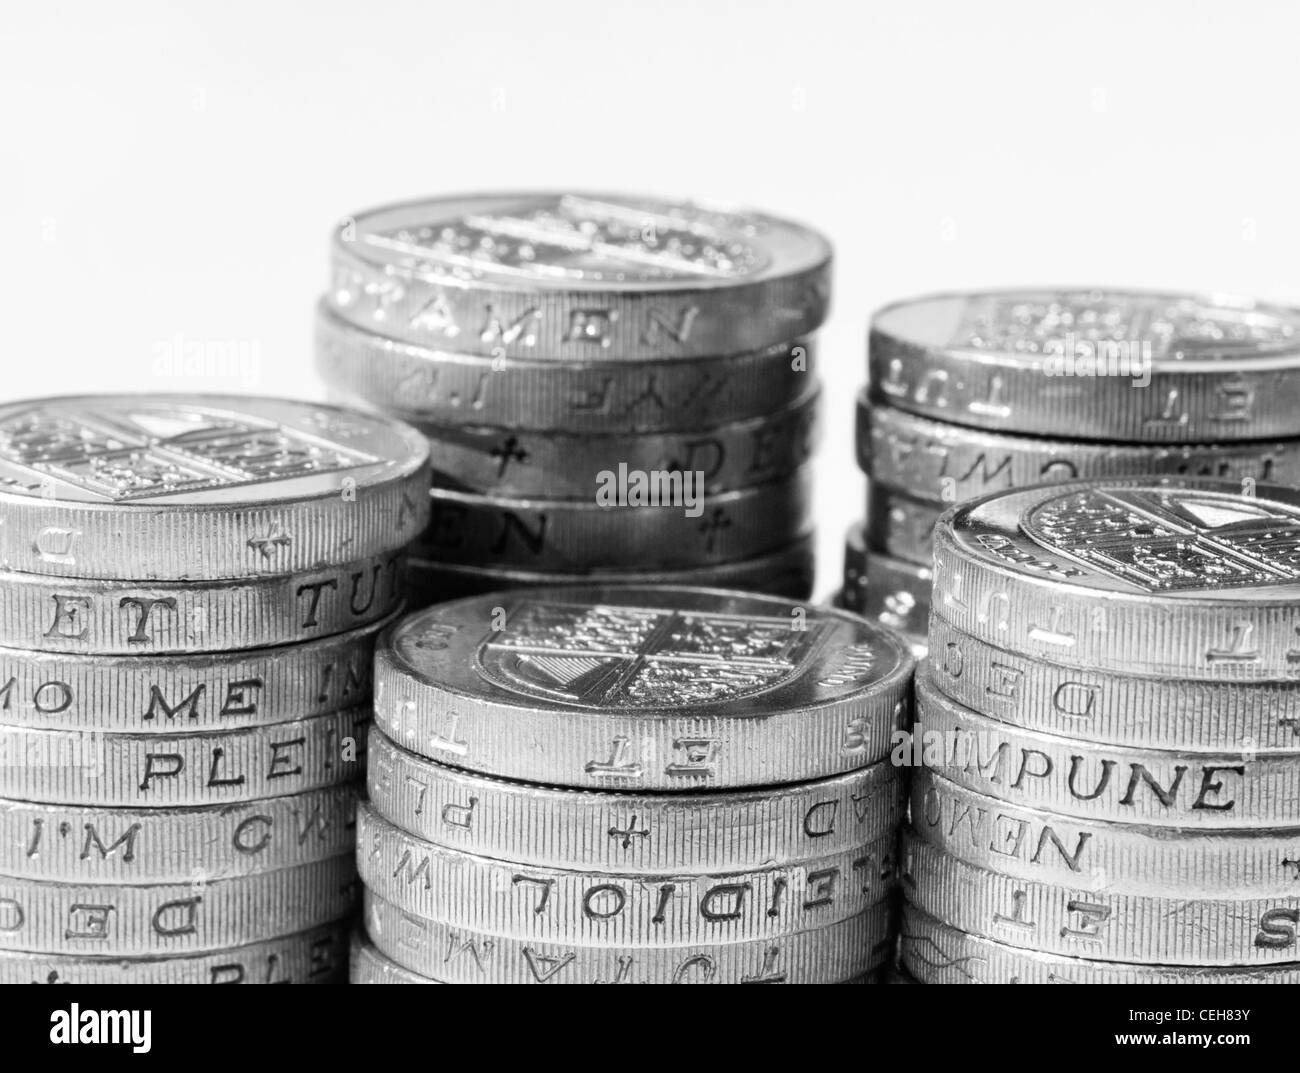 Stack of UK coins on white background Stock Photo